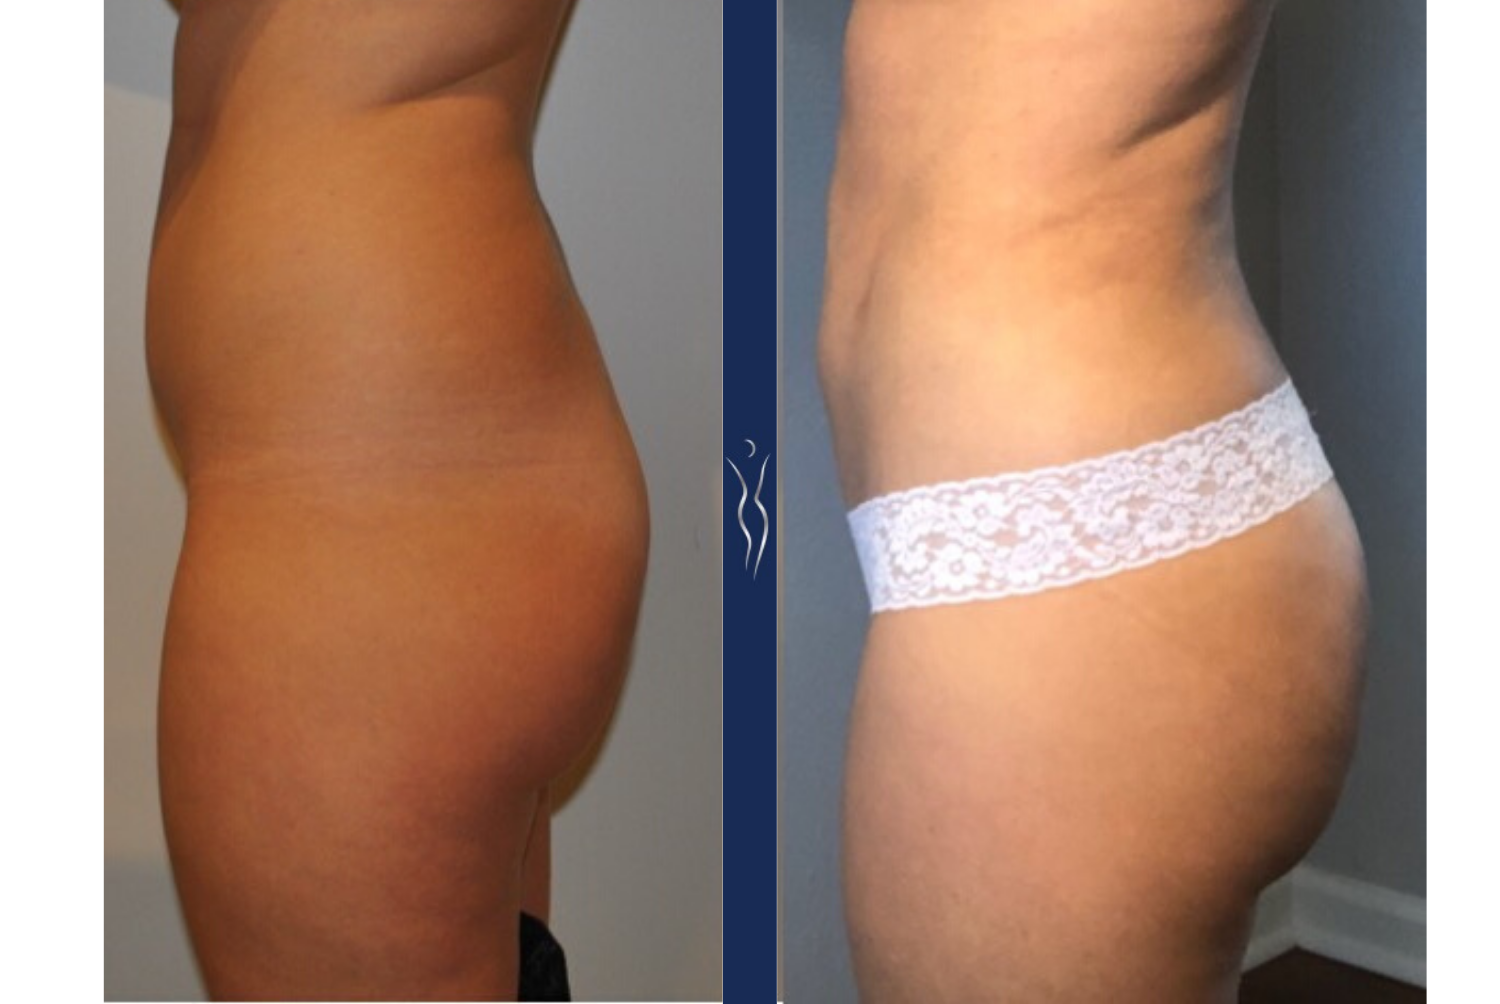 29 year old caucasian lady VASER liposuction and Renuvion with Brazilian Butt Lift left lateral